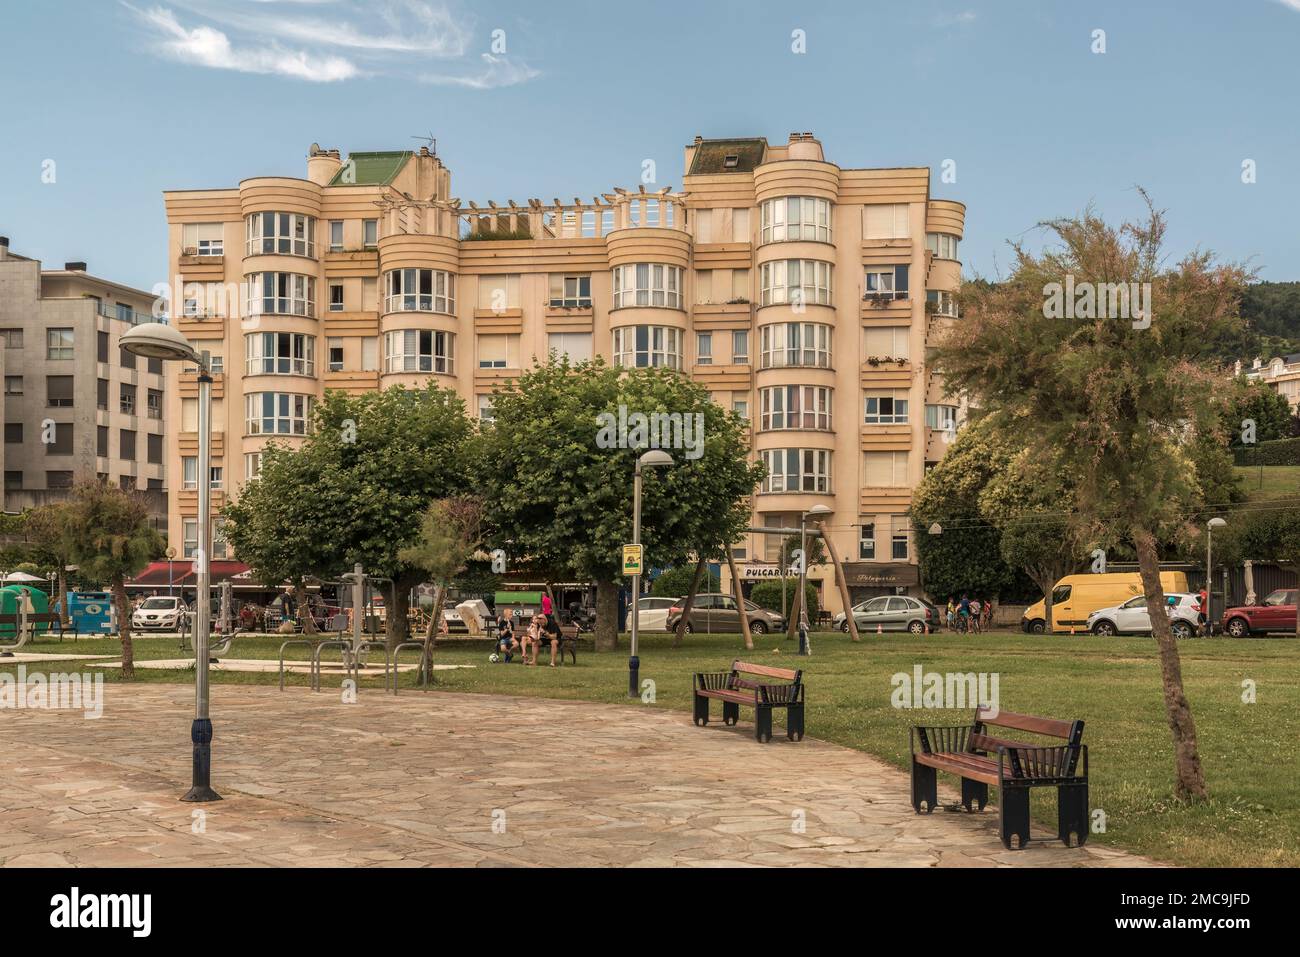 Neighborhood of houses and apartments with park in the modern Urdiales neighborhood in the town of Castro Urdiales in the province of Cantabria, Spain Stock Photo